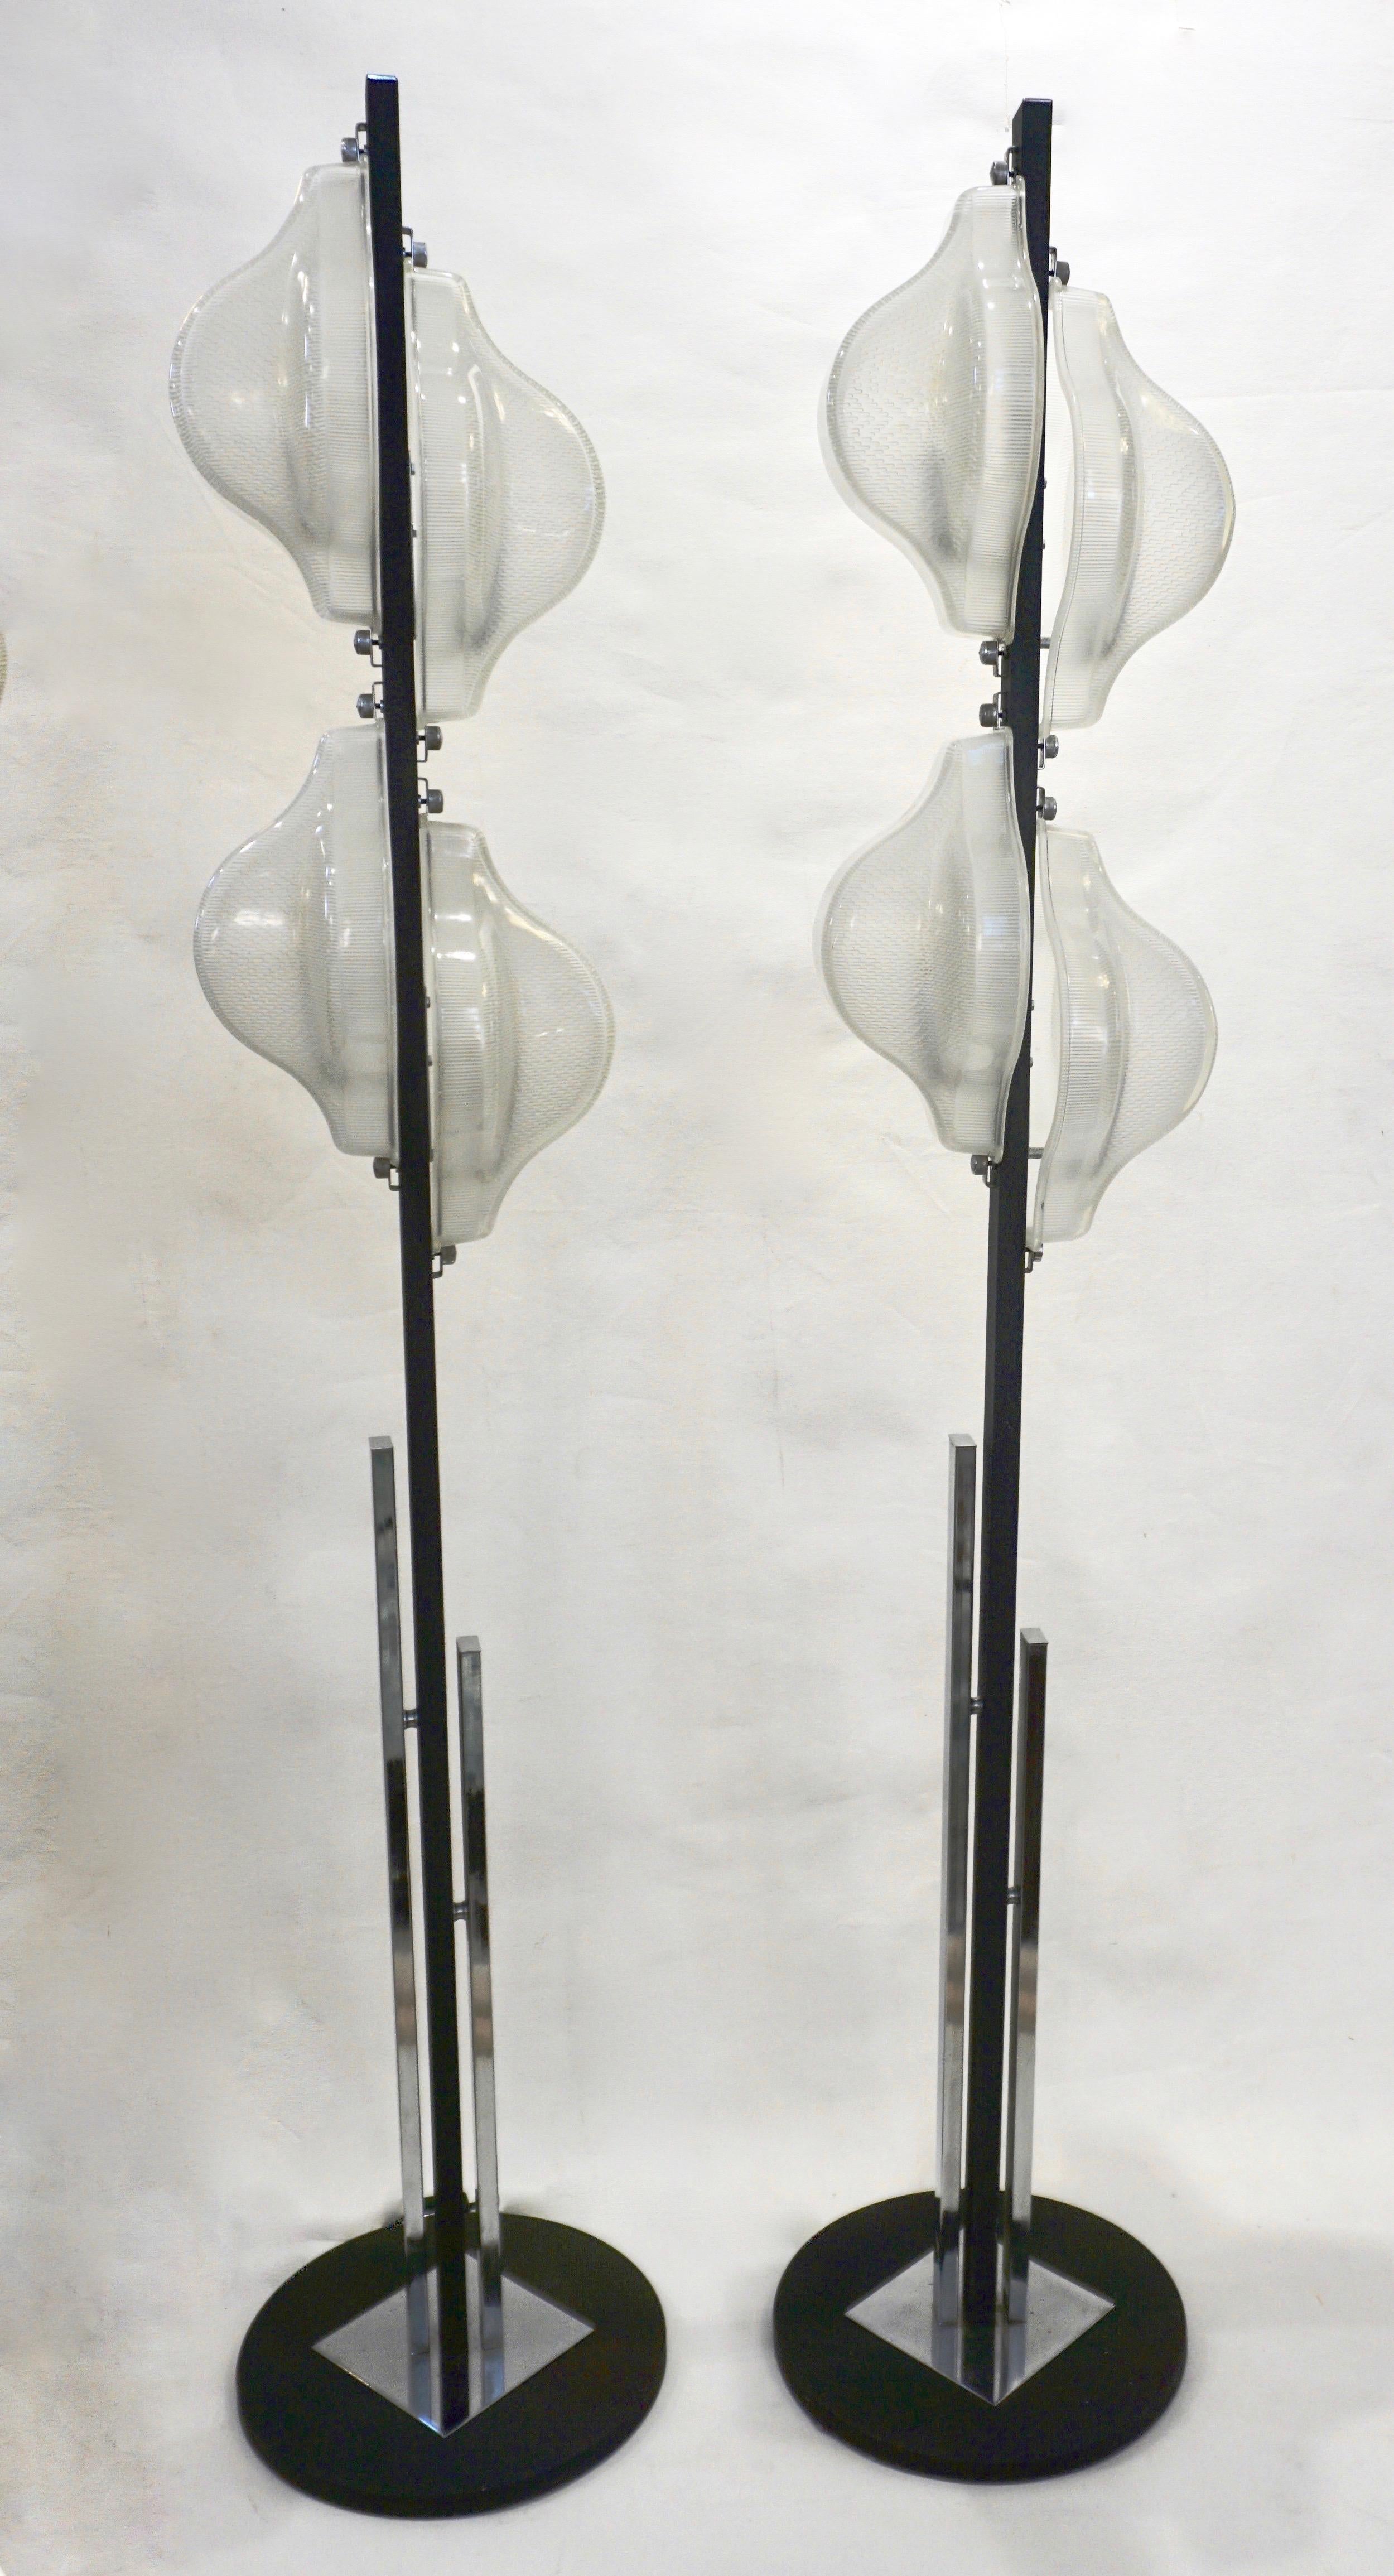 1960s Italian Pair of Minimalist White and Black Organic Chrome Floor Lamps For Sale 8